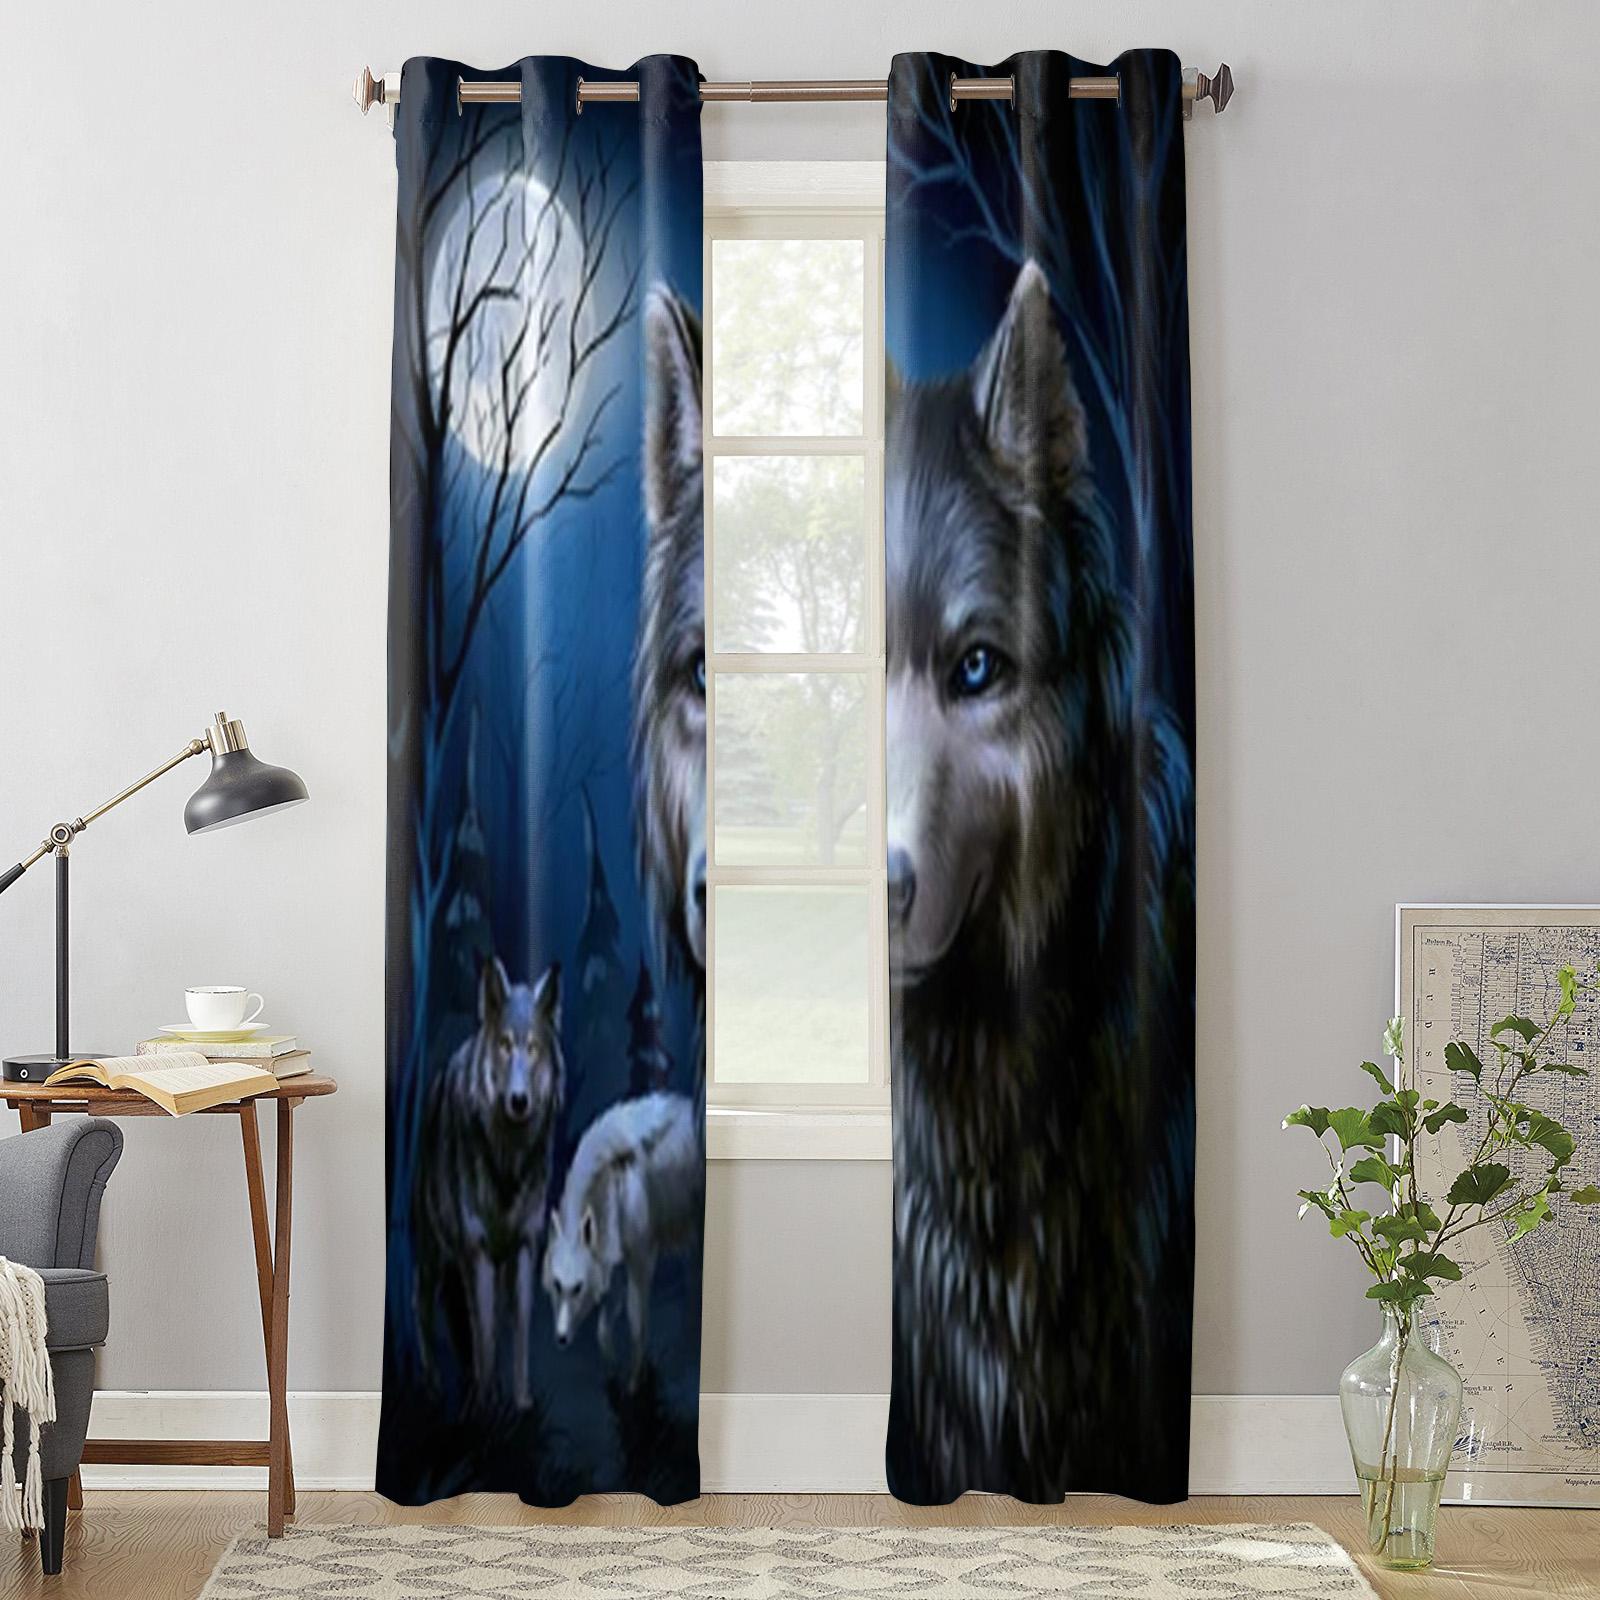 Night Forest Animal Wolf Window Curtains For Living Room Kitchen Modern Curtains Home Decor Blinds Drapes